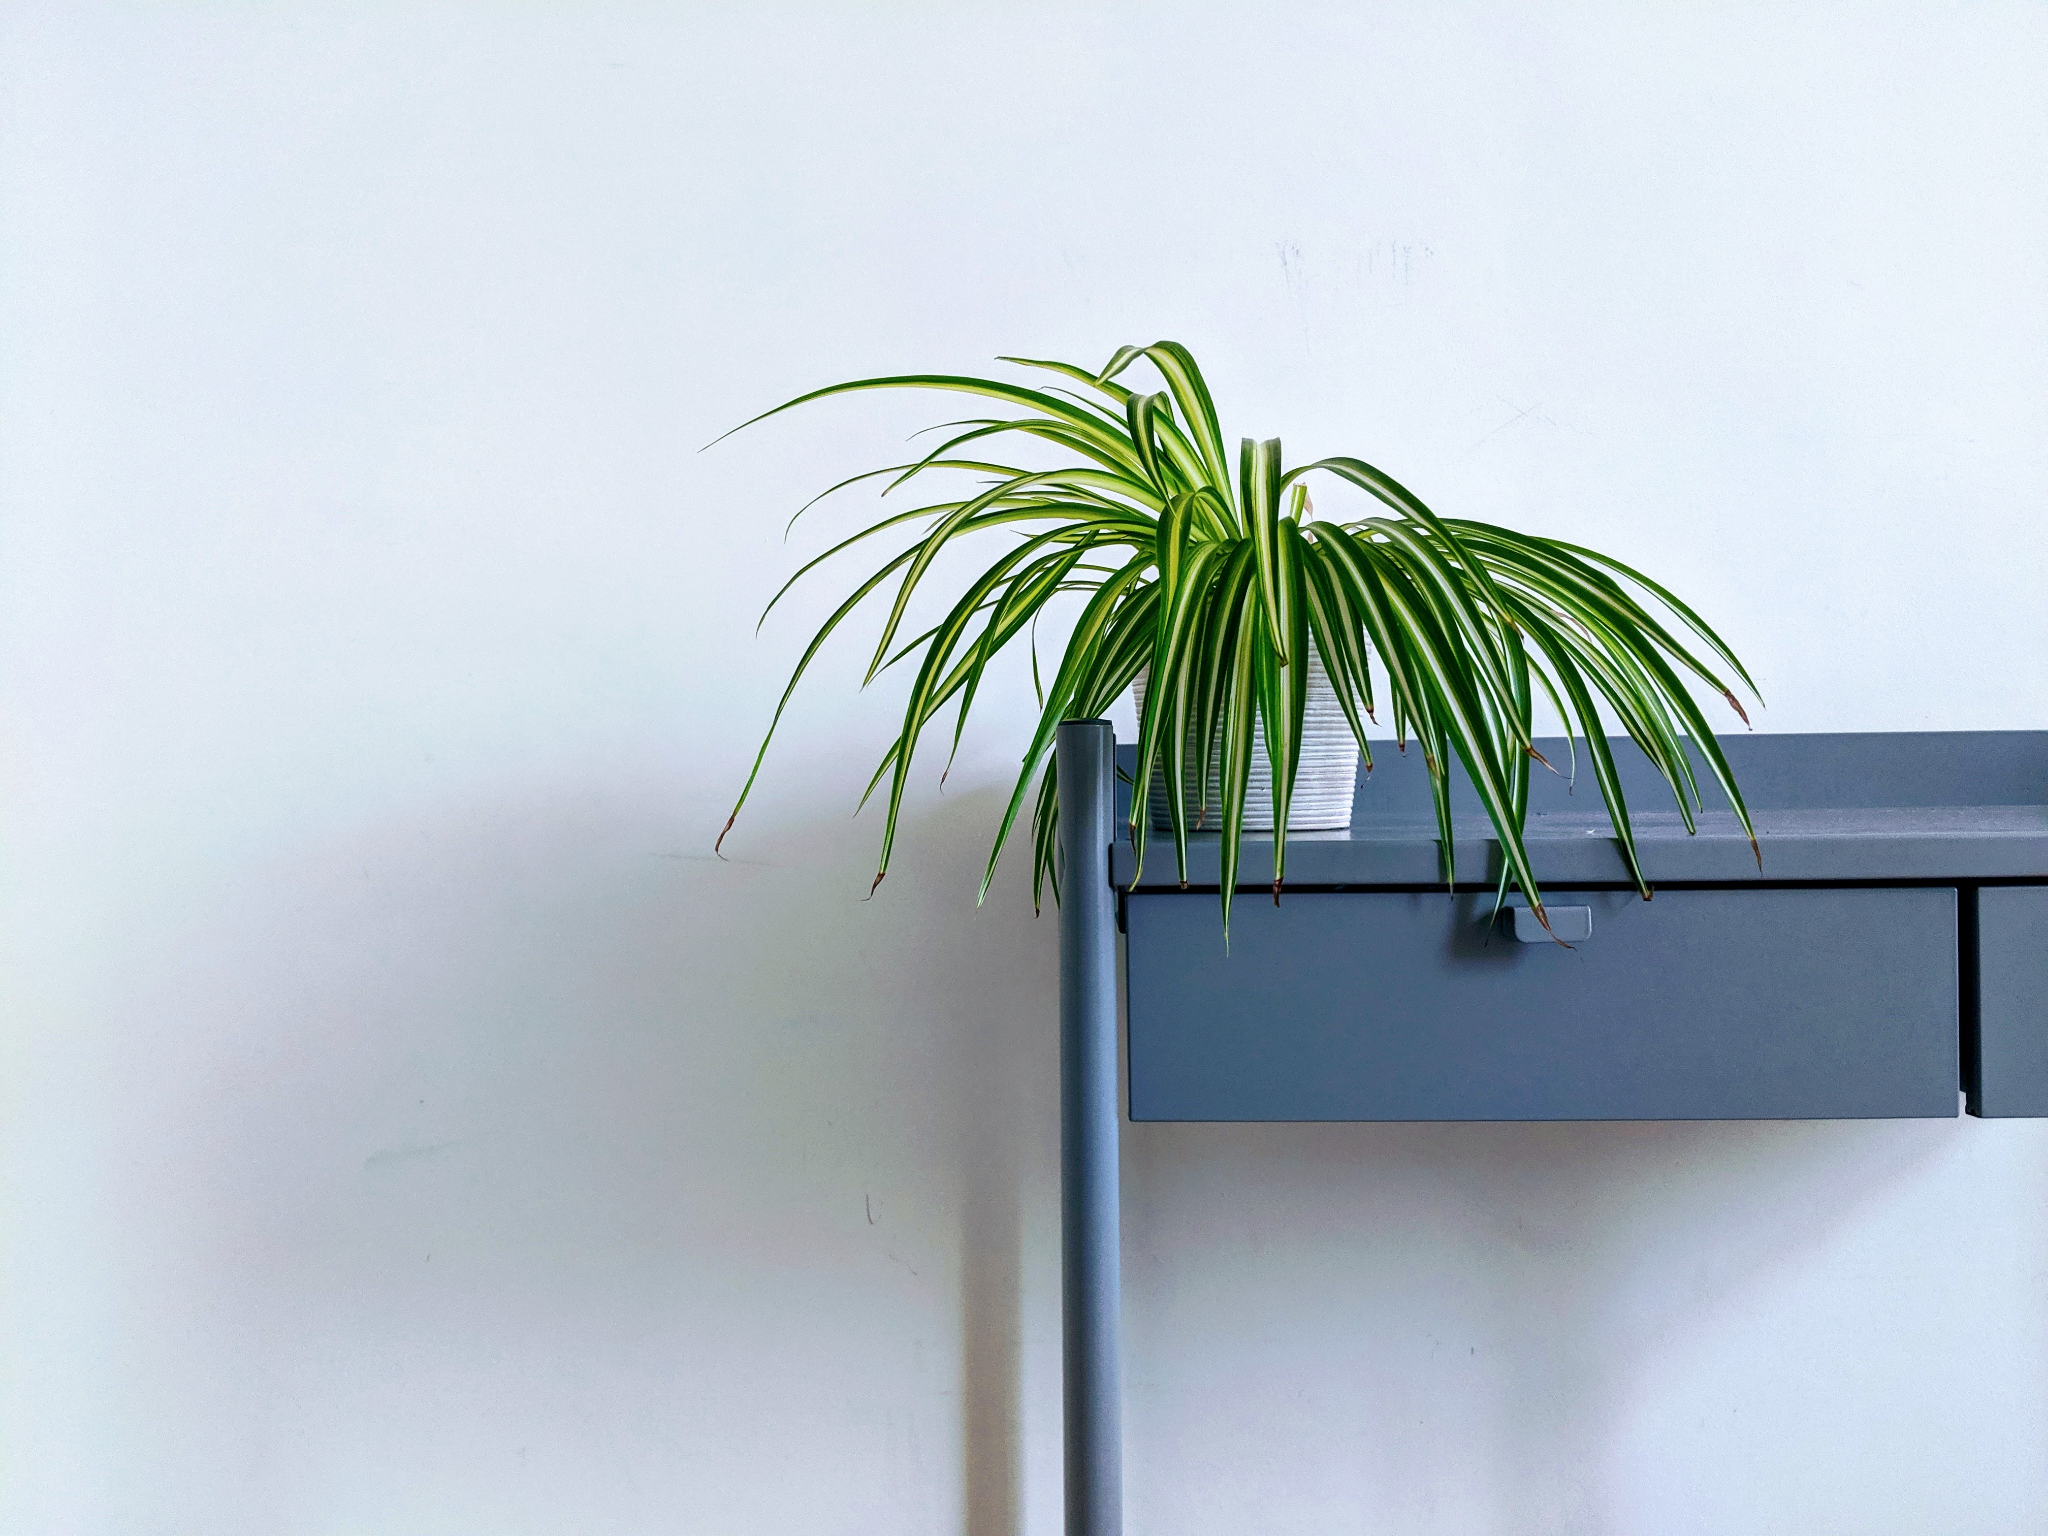 15 Up-and-coming Trends About House Plants